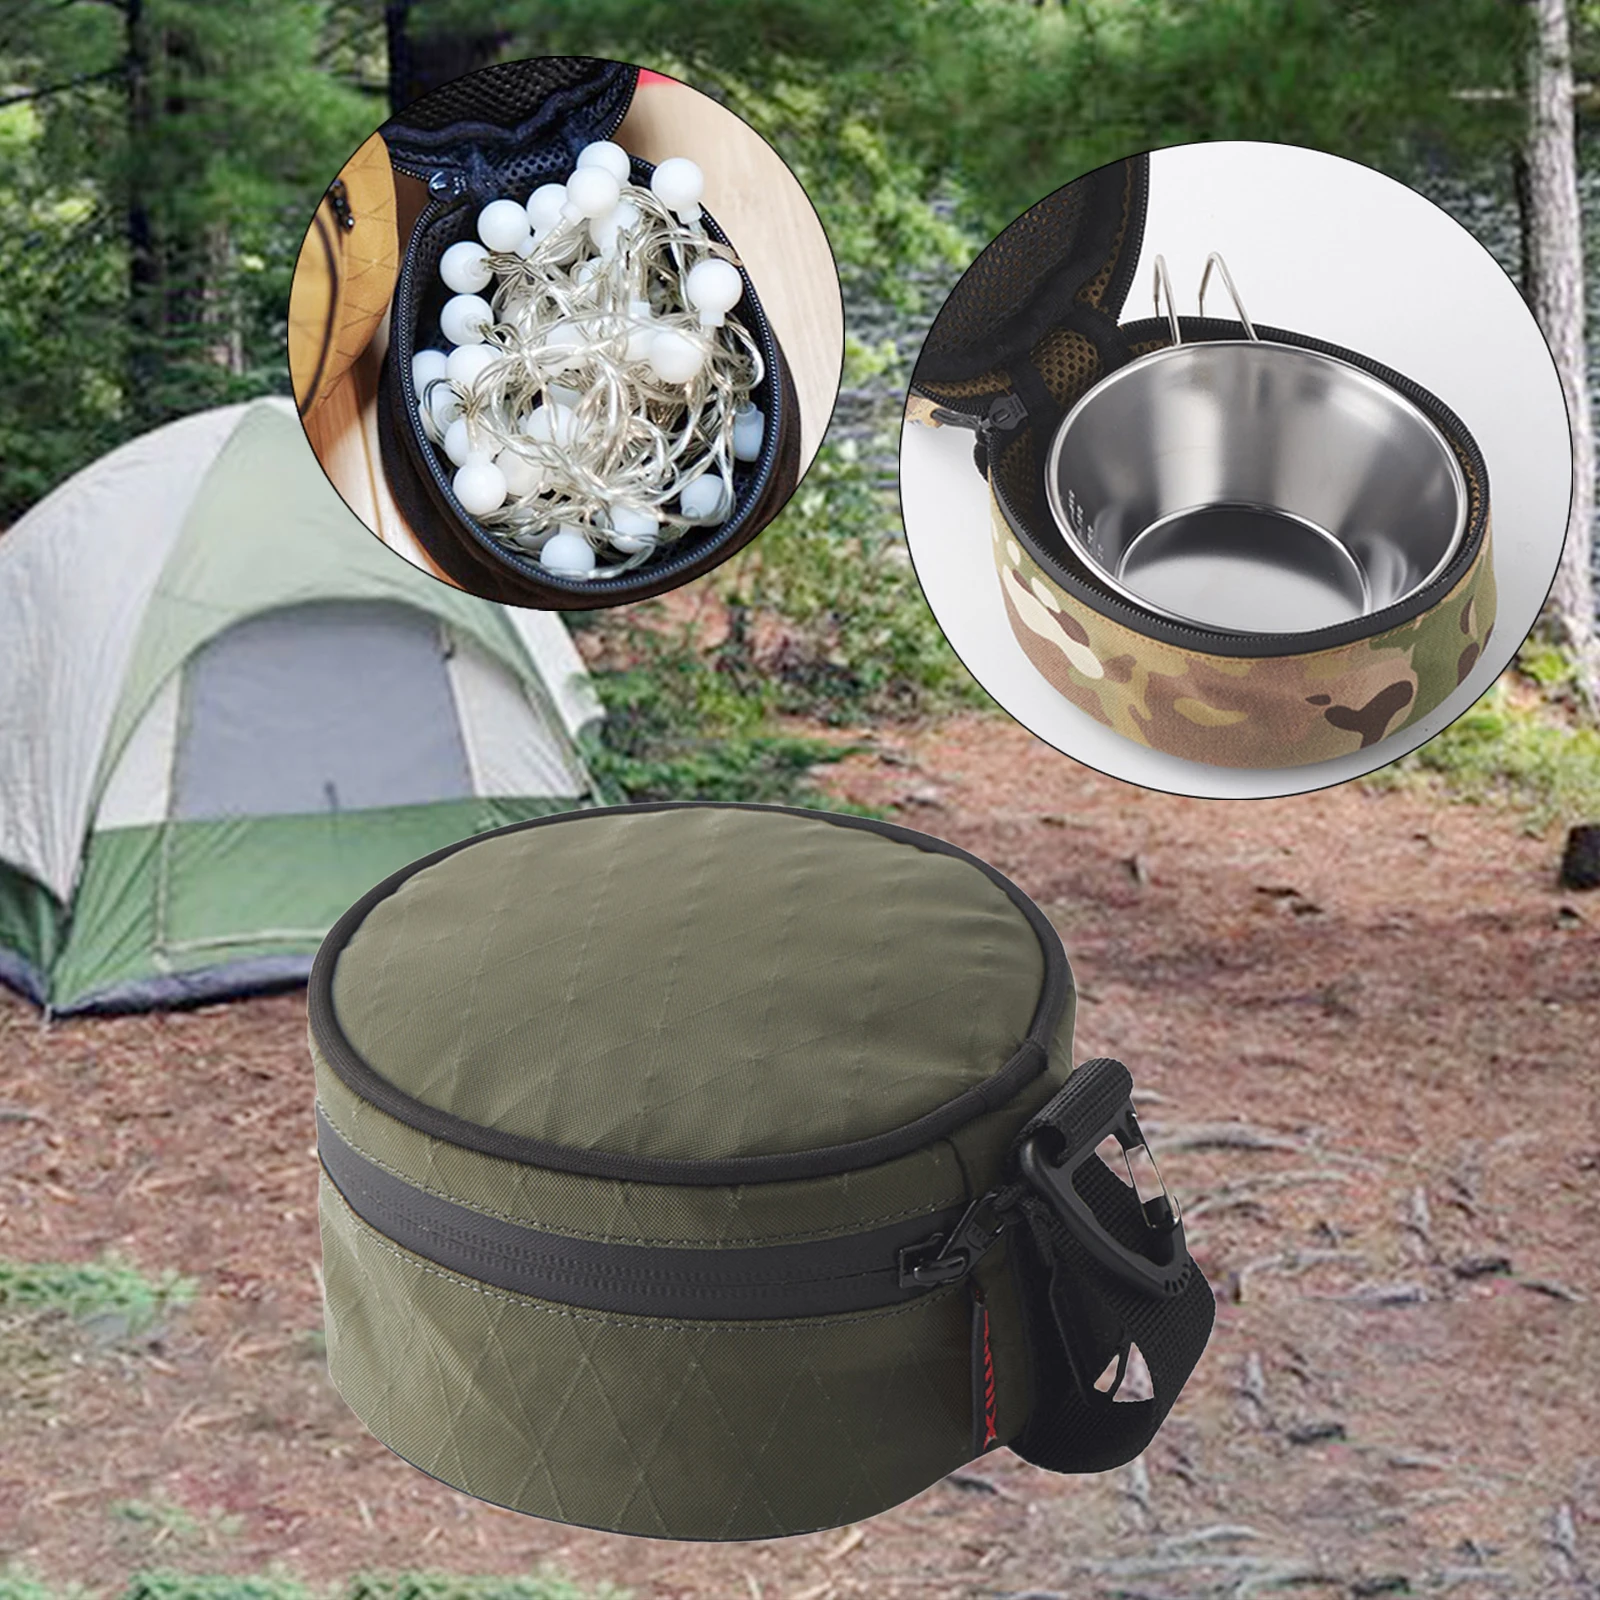 Outdoor Camping Sierra Cup Storage Bag Barbecue Tableware Portable Waterproof Container Carrying Bag for Hiking BBQ with Hooks